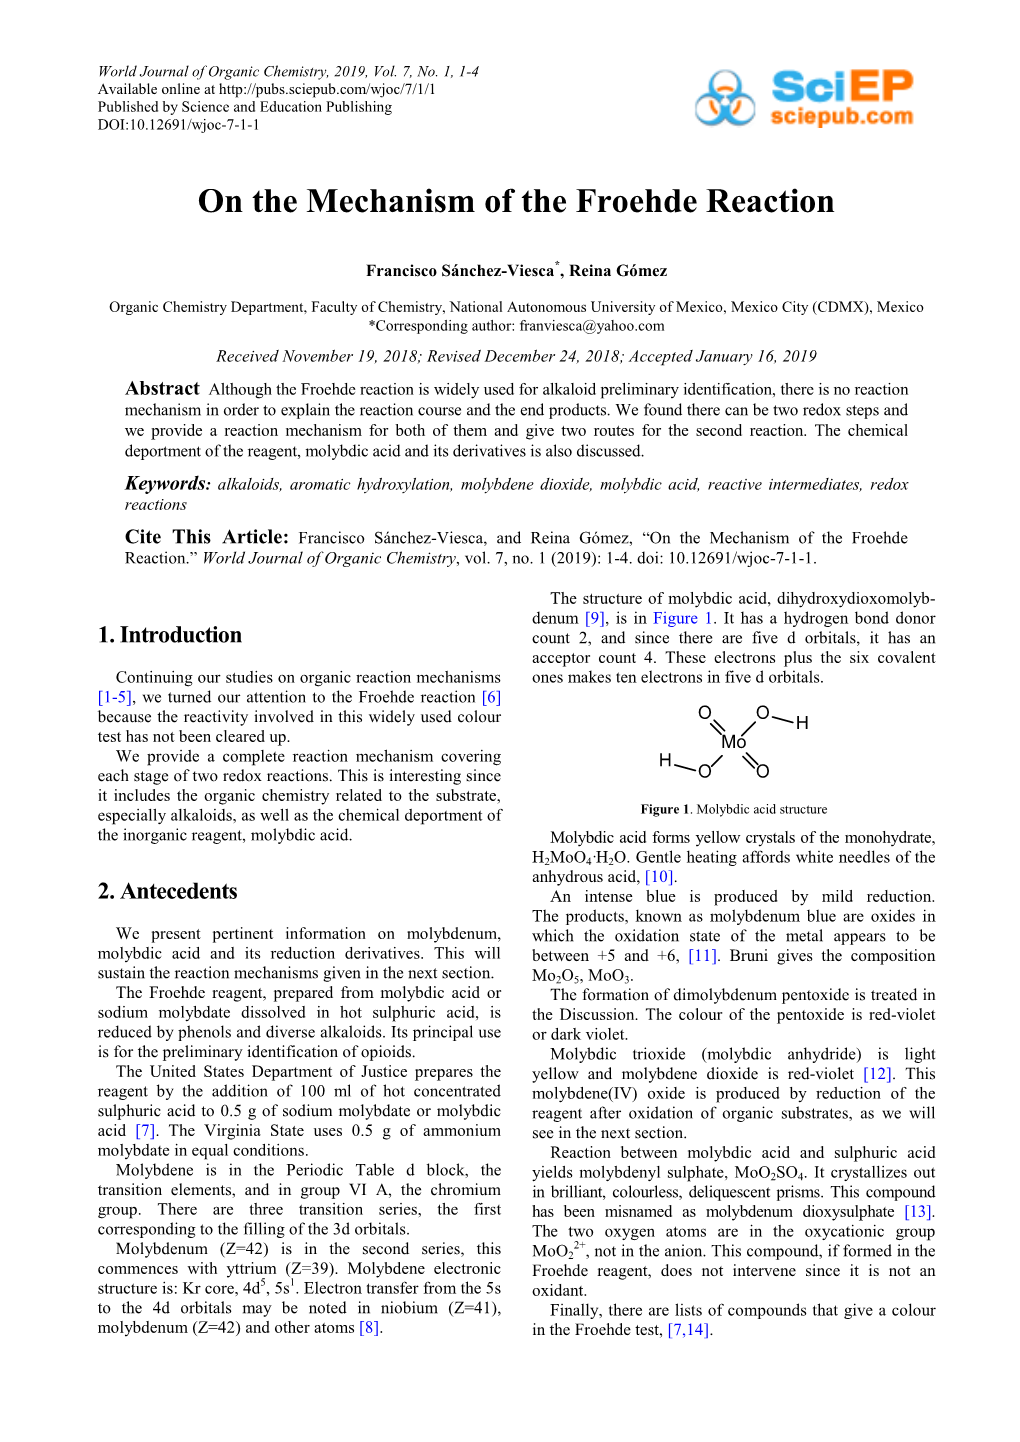 On the Mechanism of the Froehde Reaction